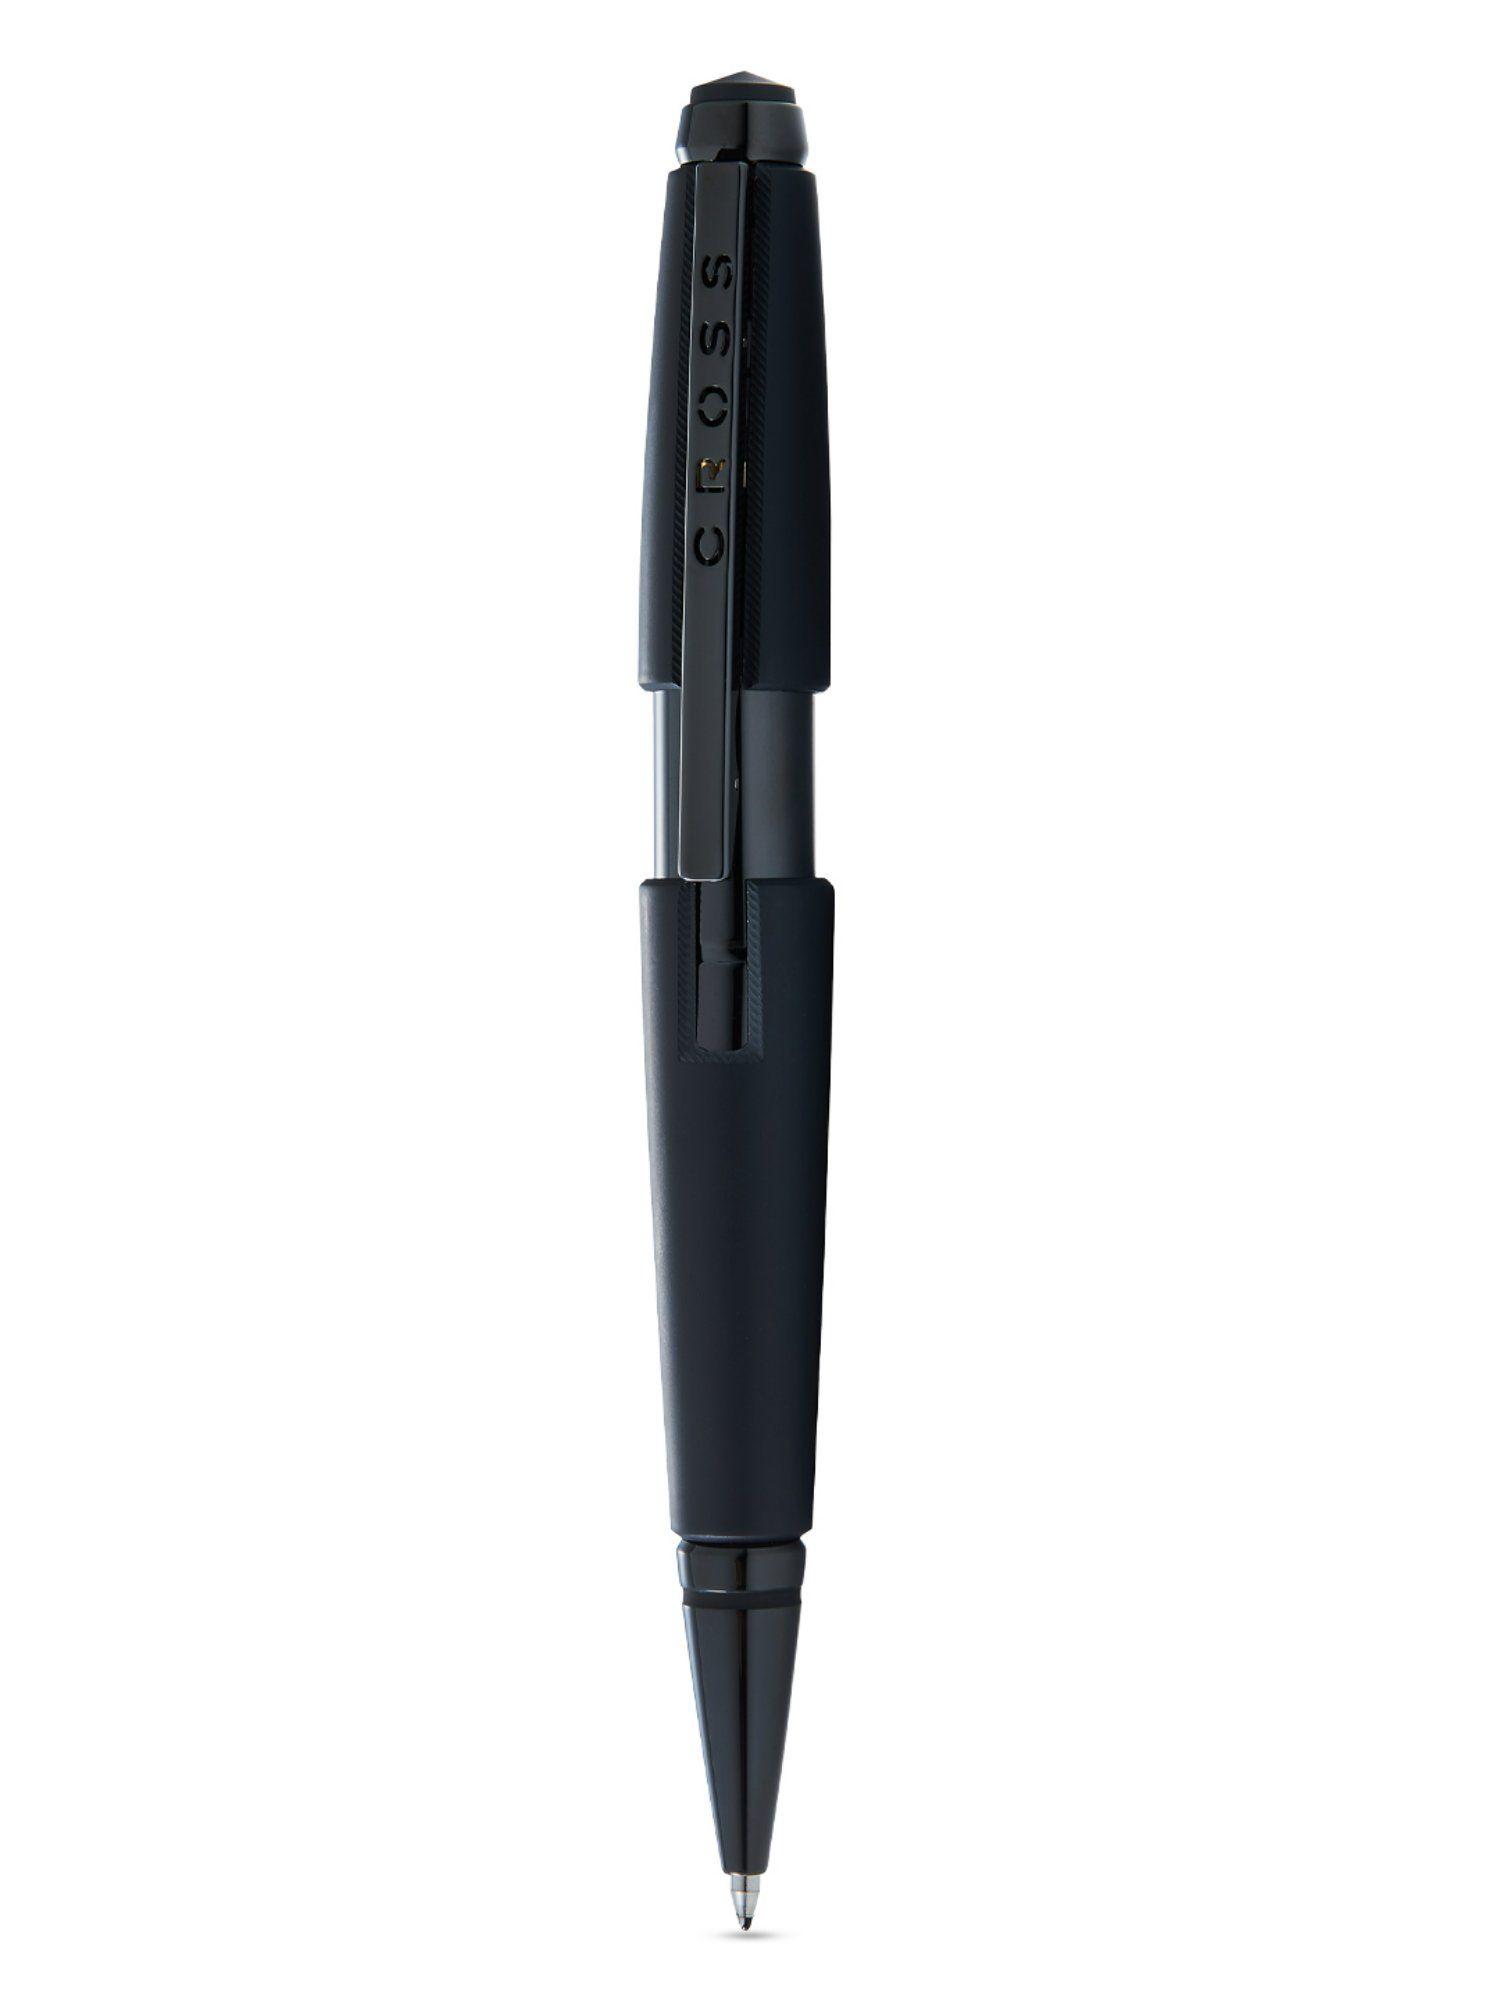 at0555-11 edge black matt lacquer rollingball pen with pvd appts